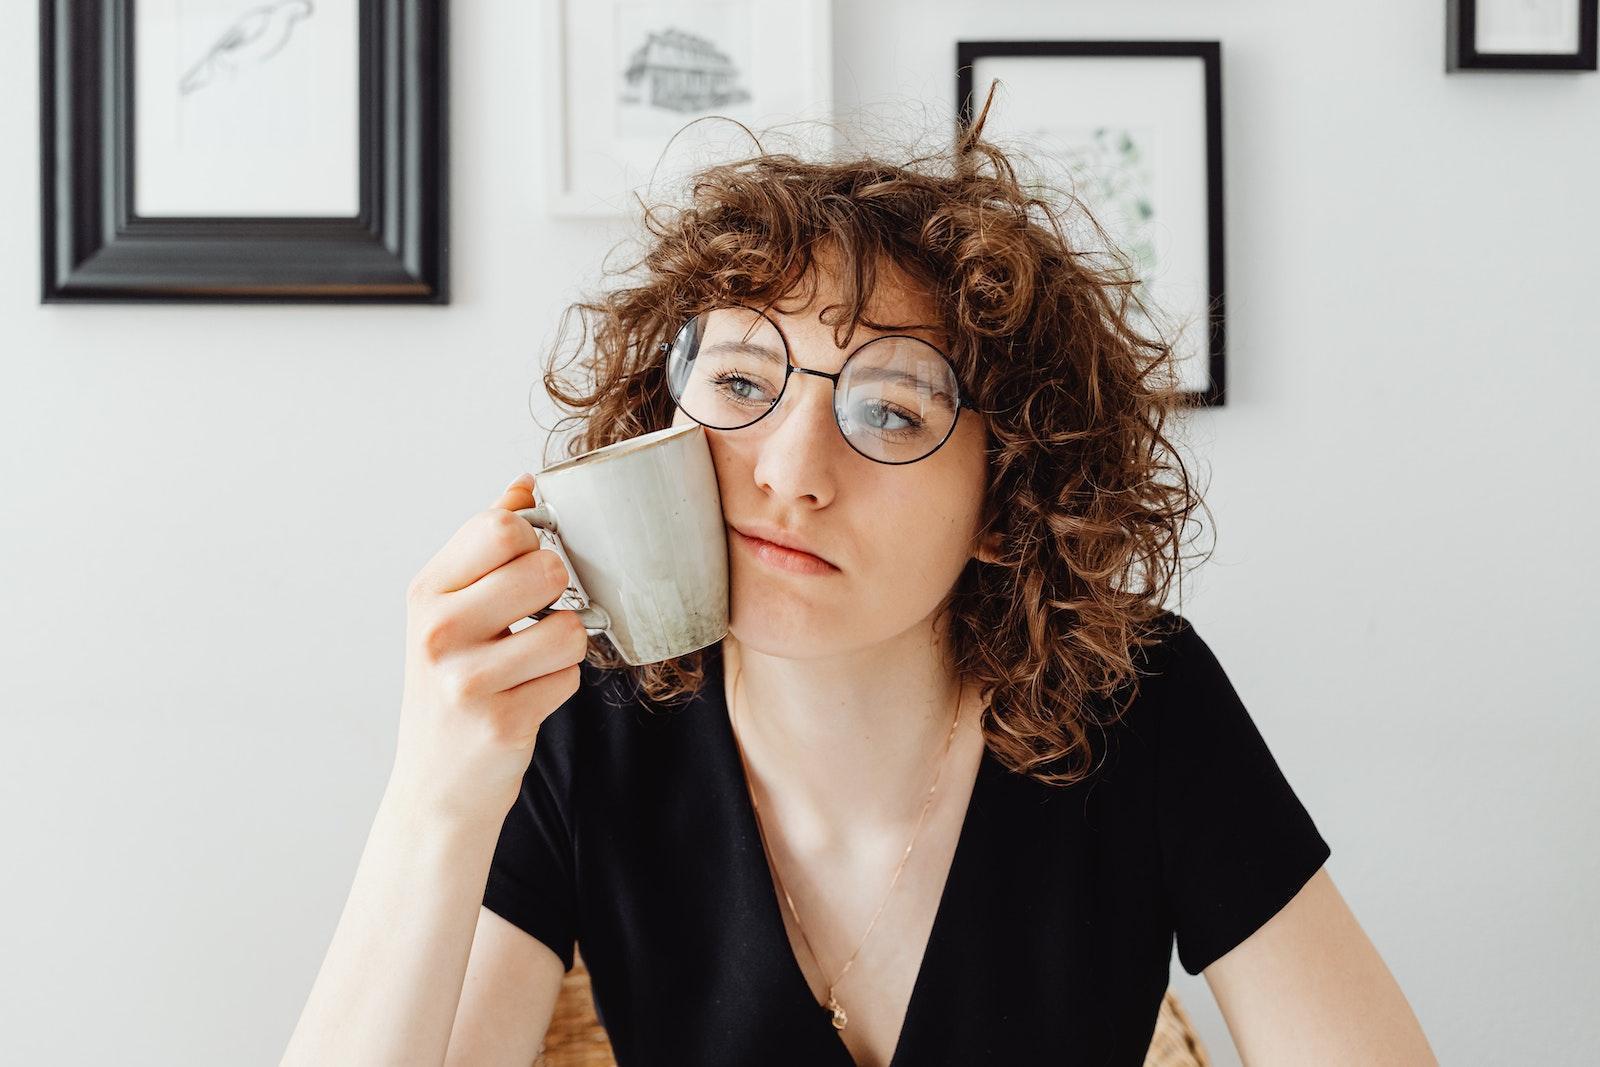 Curly-Haired Woman Holding a Coffee Mug